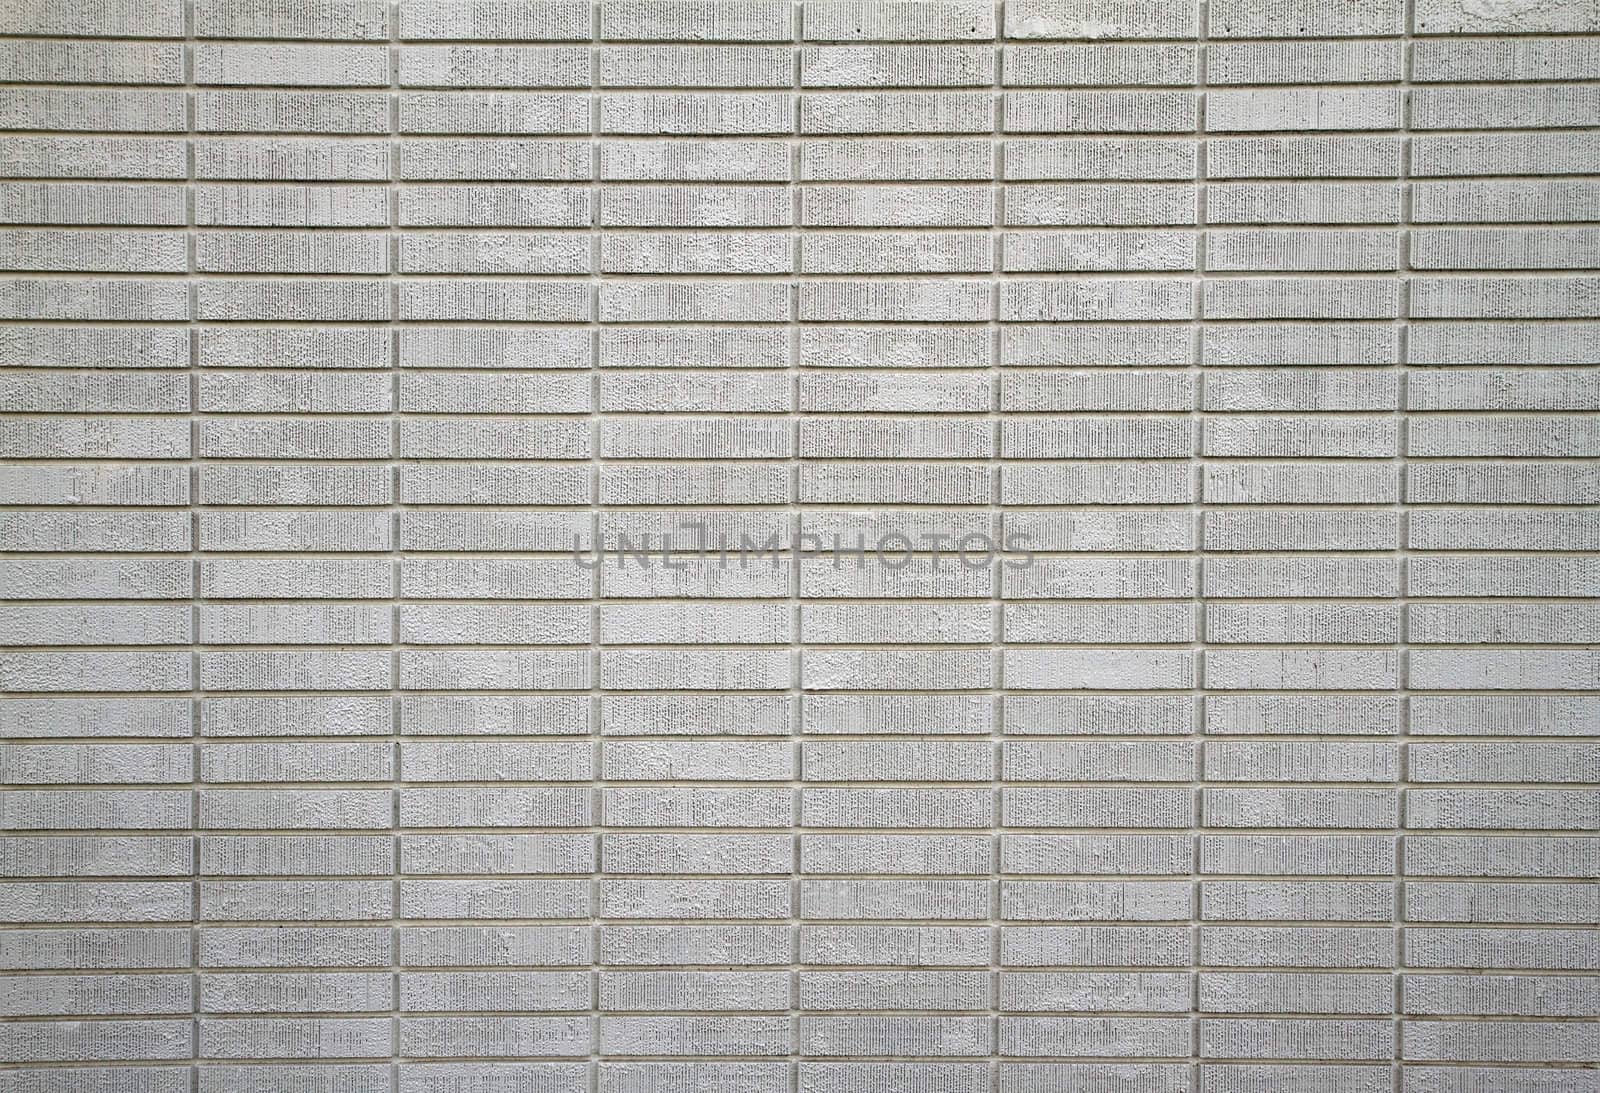 Large wall of white painted bricks taken from distance